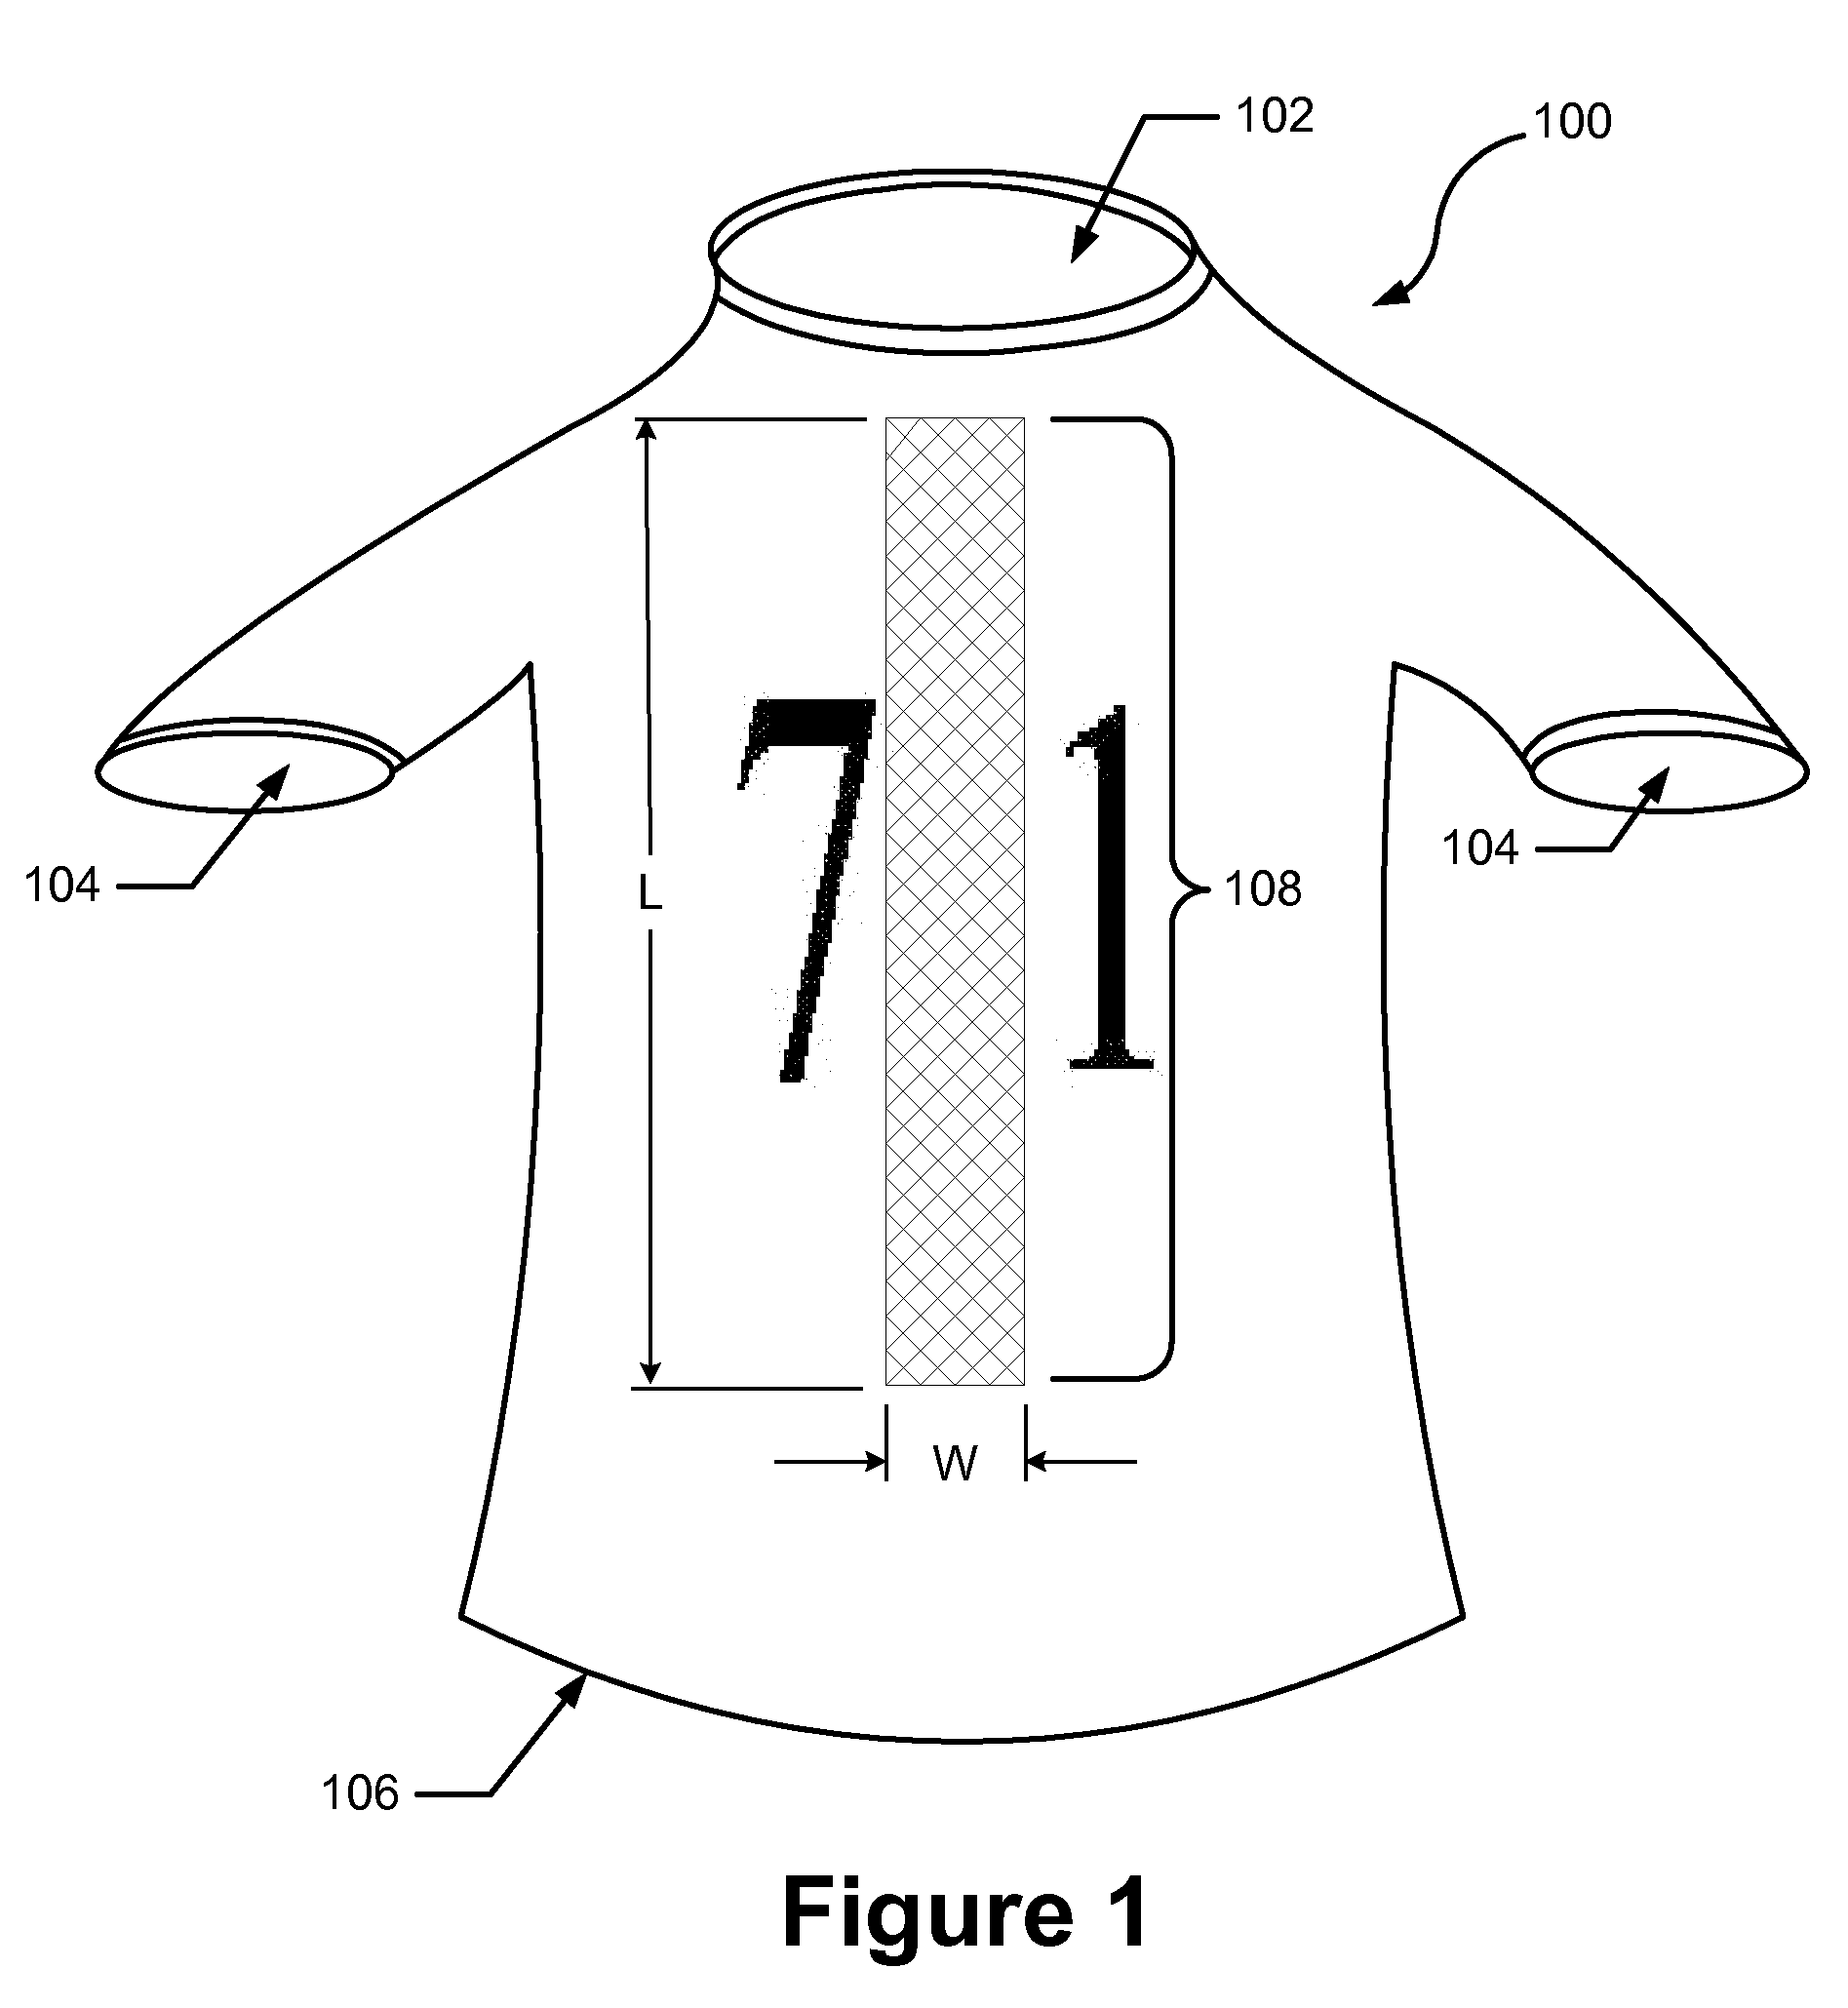 Article Of Apparel Incorporating A Zoned Modifiable Textile Structure